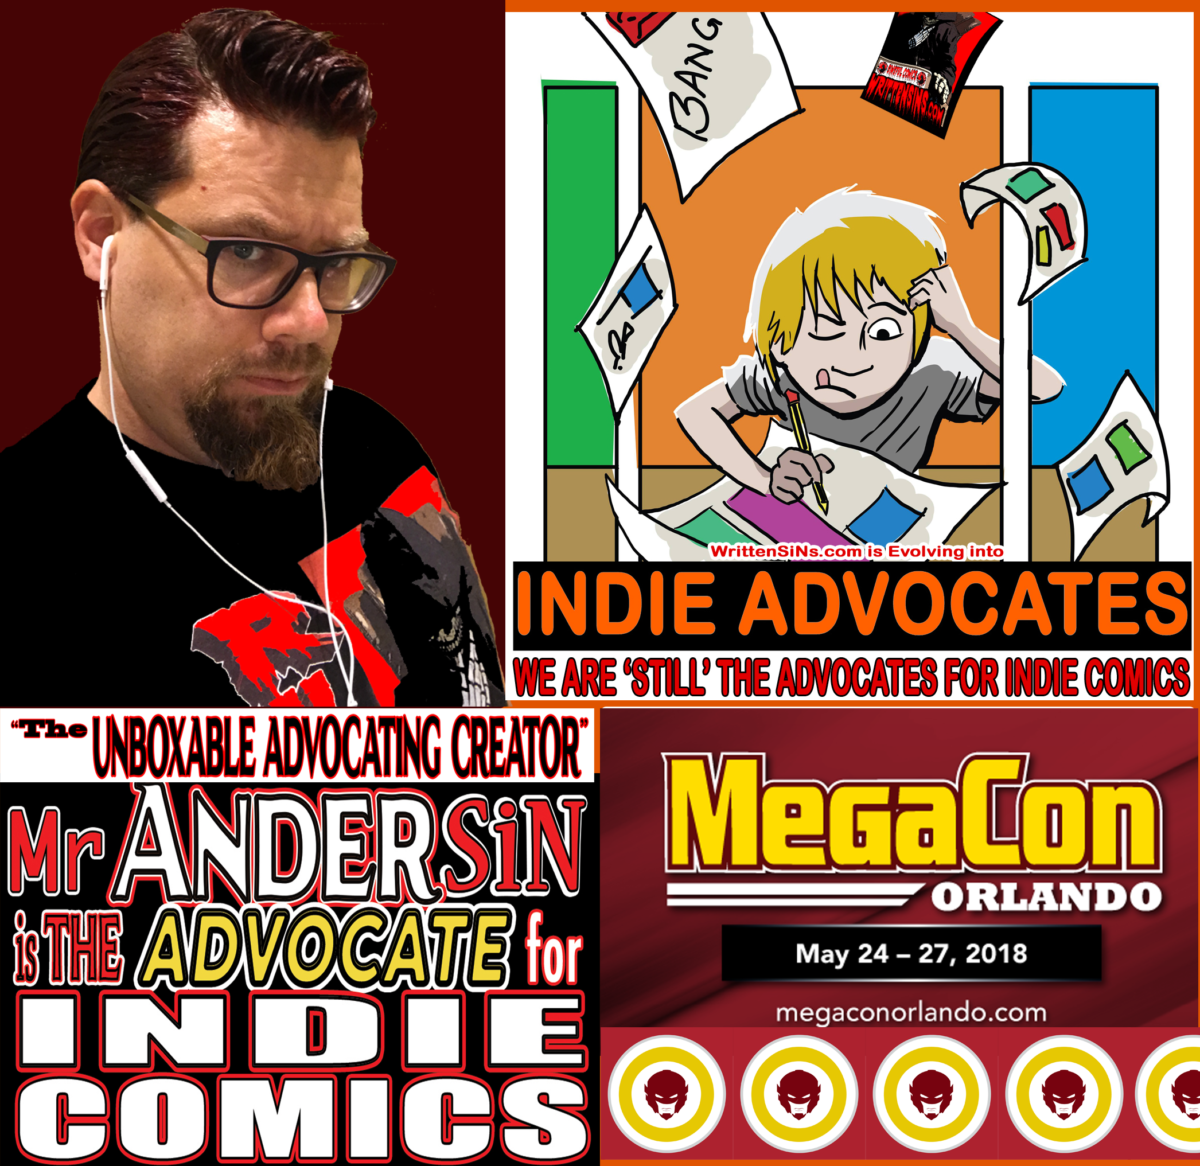 COMIC CON HIGHWAY EXITING with INDIE ADVOCATING  in FLORIDA::  MEGA CON ORLANDO May 24-27-INDIE ADVOCATES and MR Andersin are gonna do some MEGA ADVOCATING  .  .